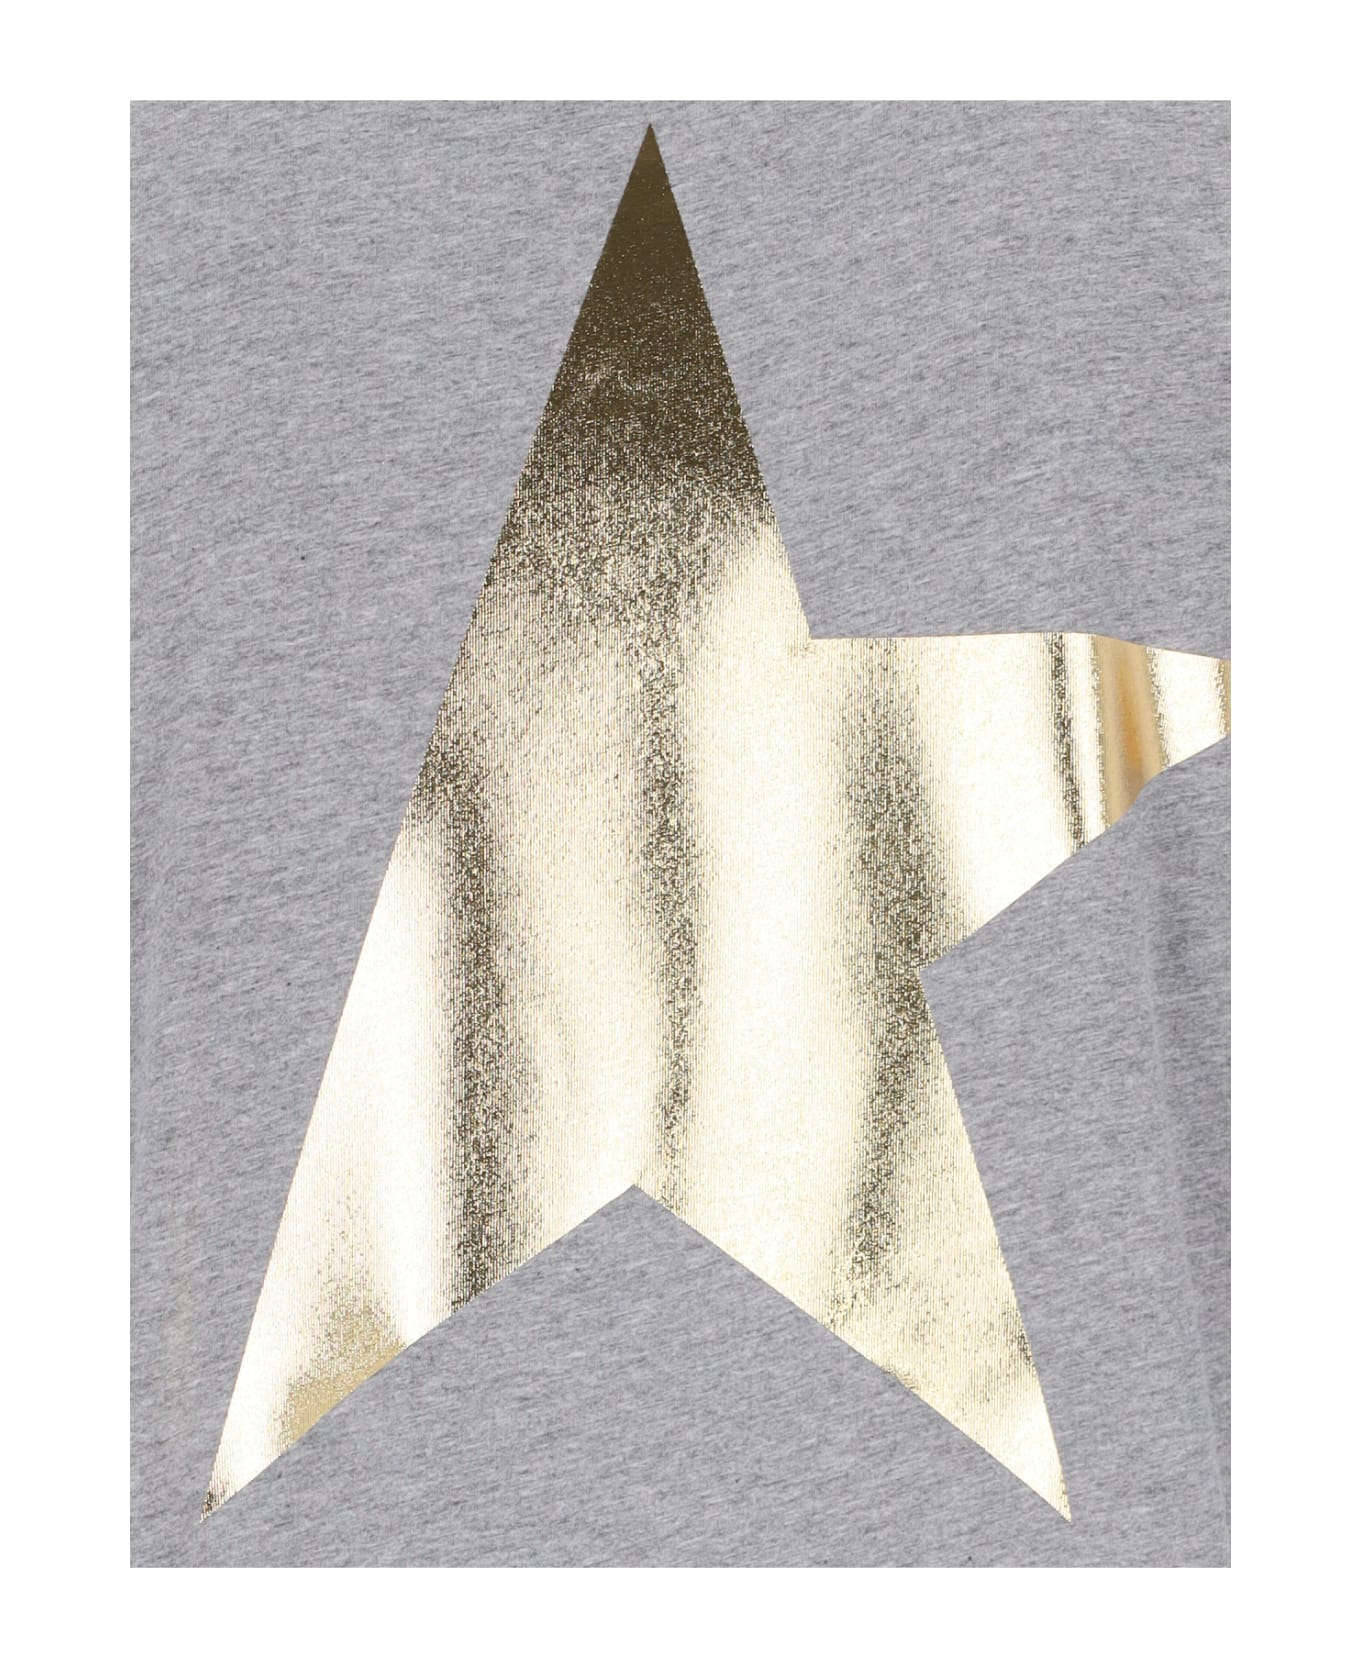 Golden Goose T-shirt With Logo And Star - Grey